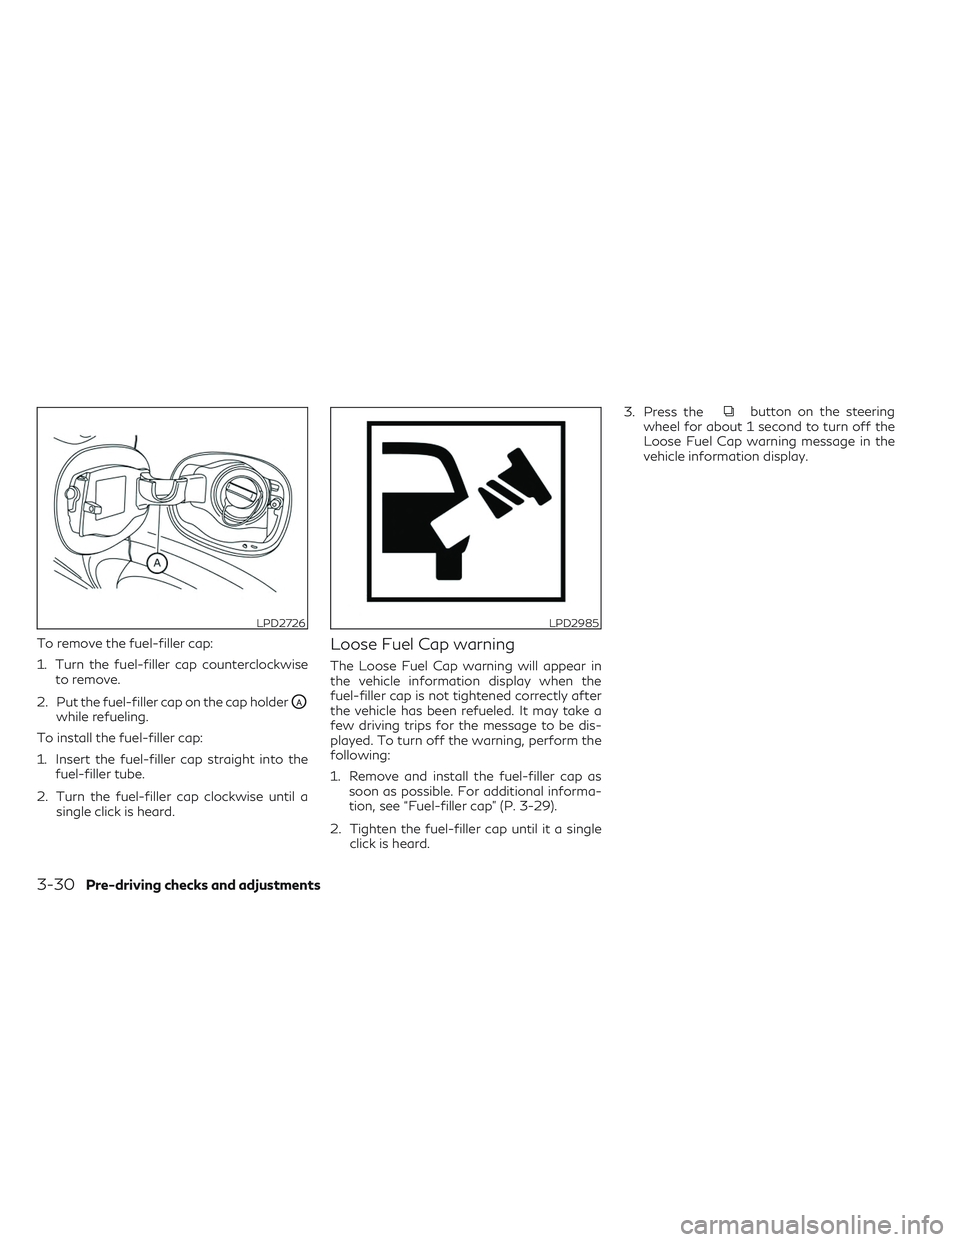 INFINITI QX50 2022  Owners Manual To remove the fuel-filler cap:
1. Turn the fuel-filler cap counterclockwiseto remove.
2. Put the fuel-filler cap on the cap holder
OAwhile refueling.
To install the fuel-filler cap:
1. Insert the fuel